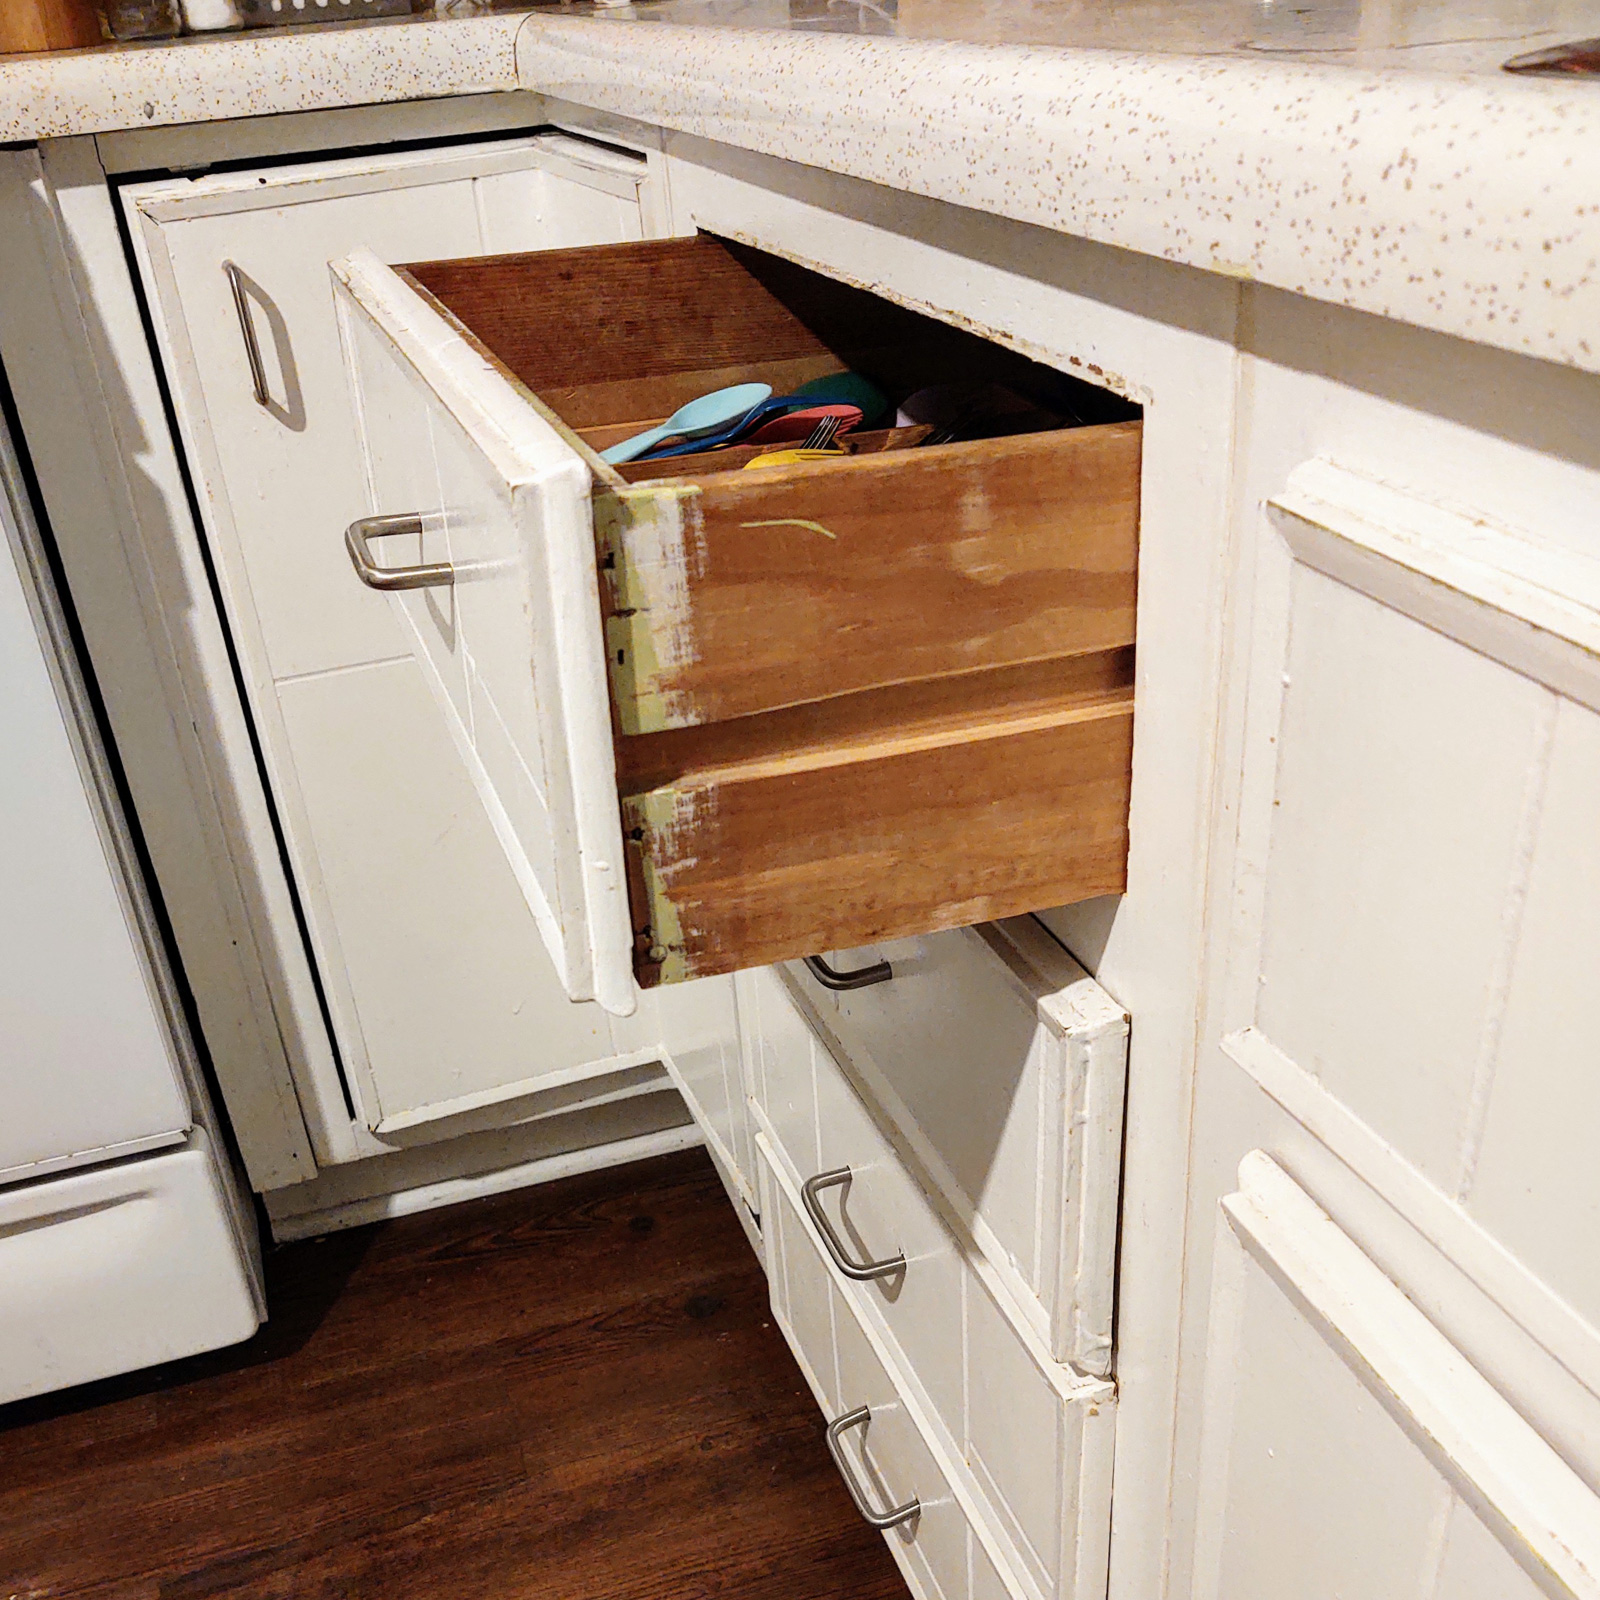 Entry 161 - The wear & tear on these cabinets set the stage for the entire kitchen